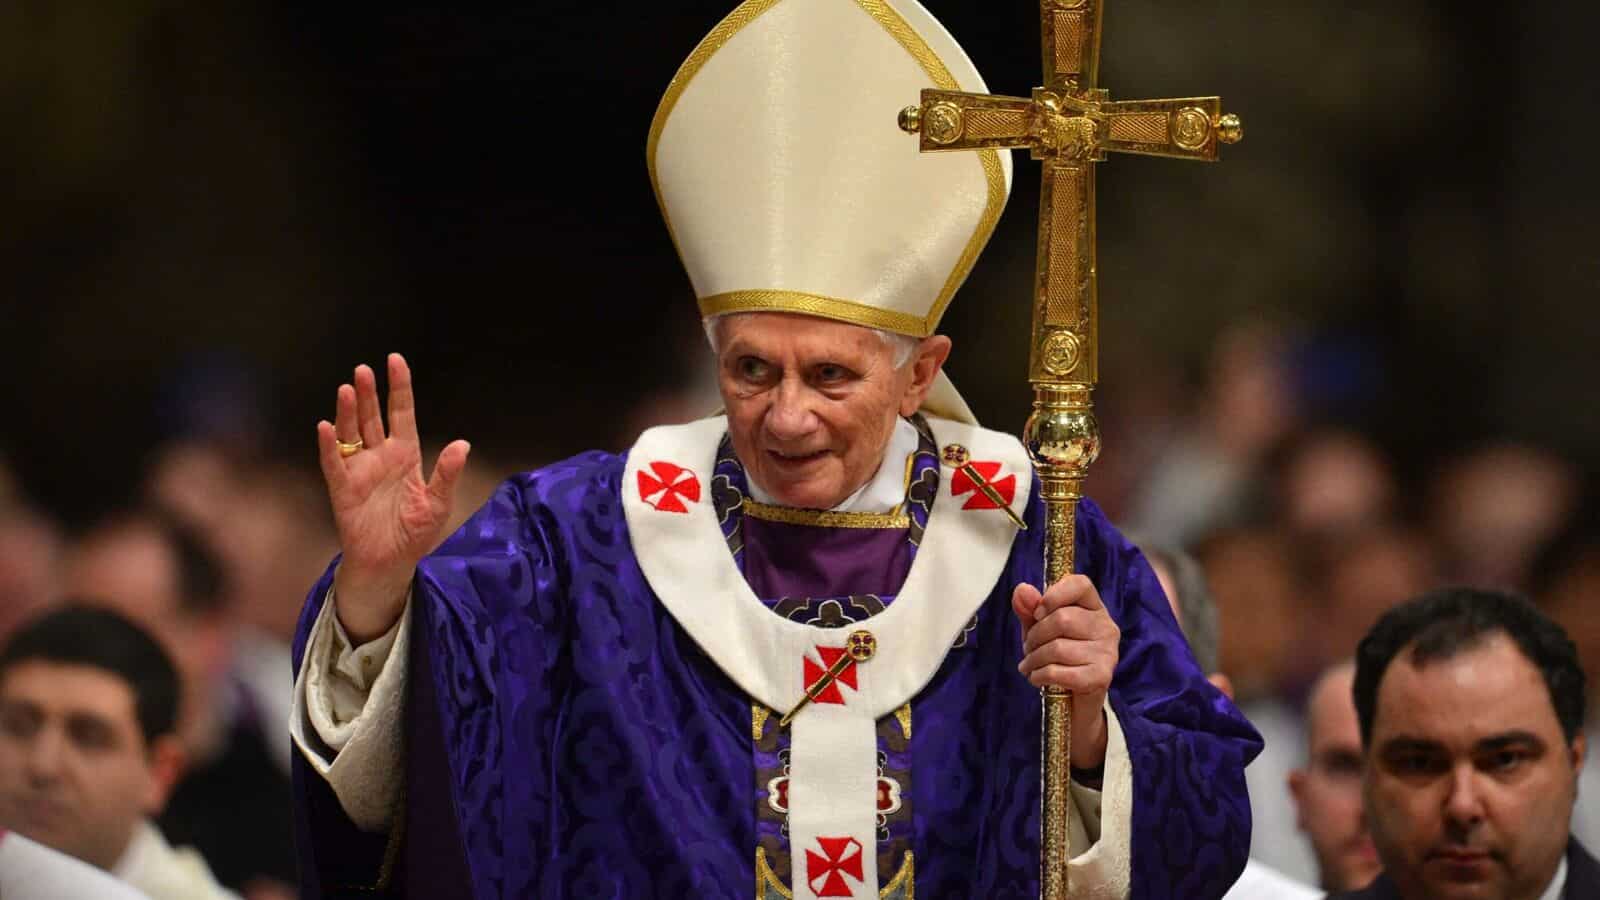 Former Pope Benedict XVI, first to resign in 600 years, dies at 95